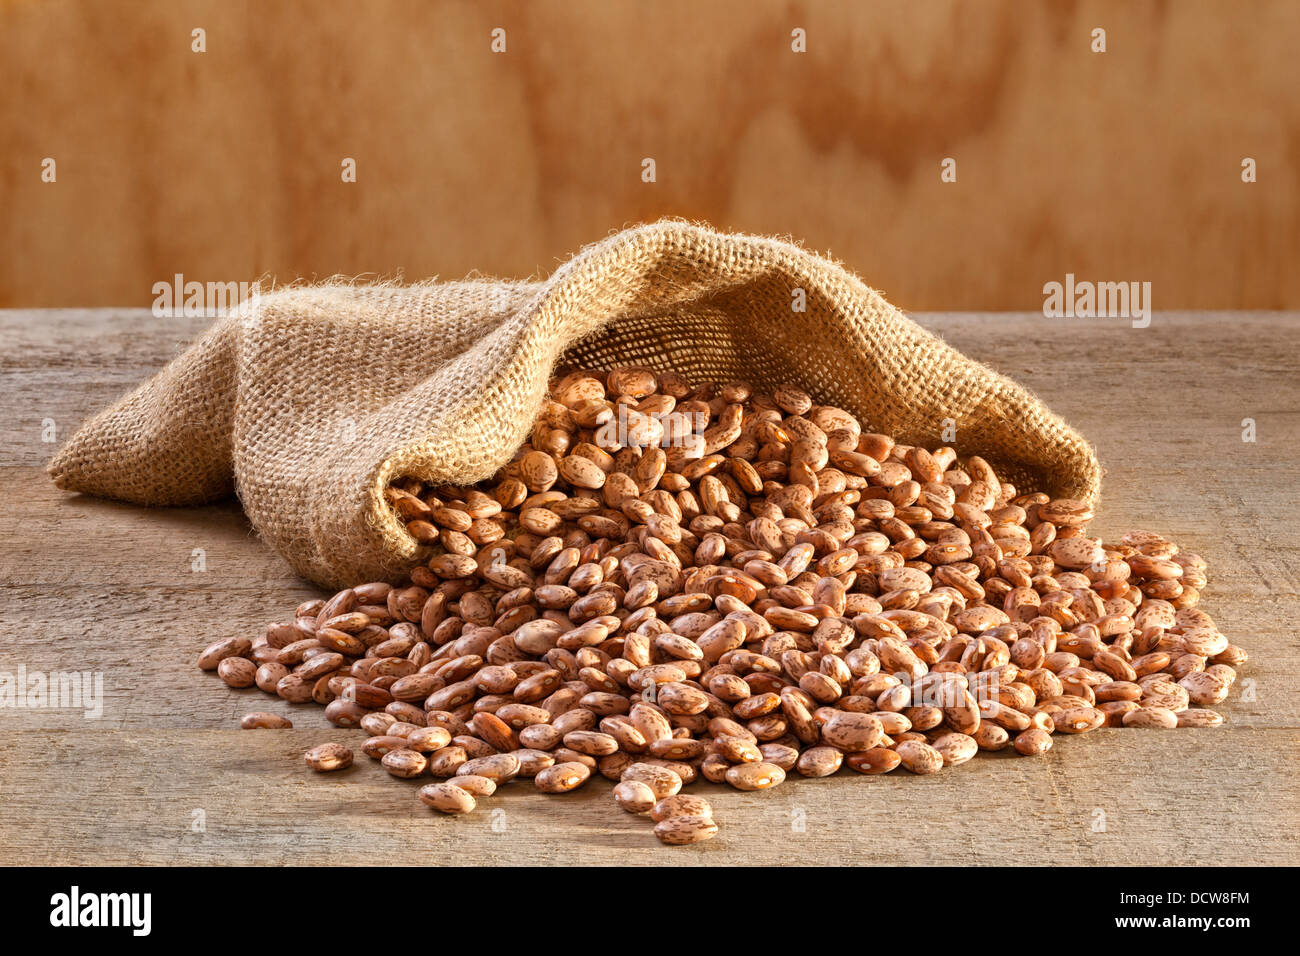 Pinto Beans in Sack - raw pinto beans spilling from a burlap or jute sack. Stock Photo